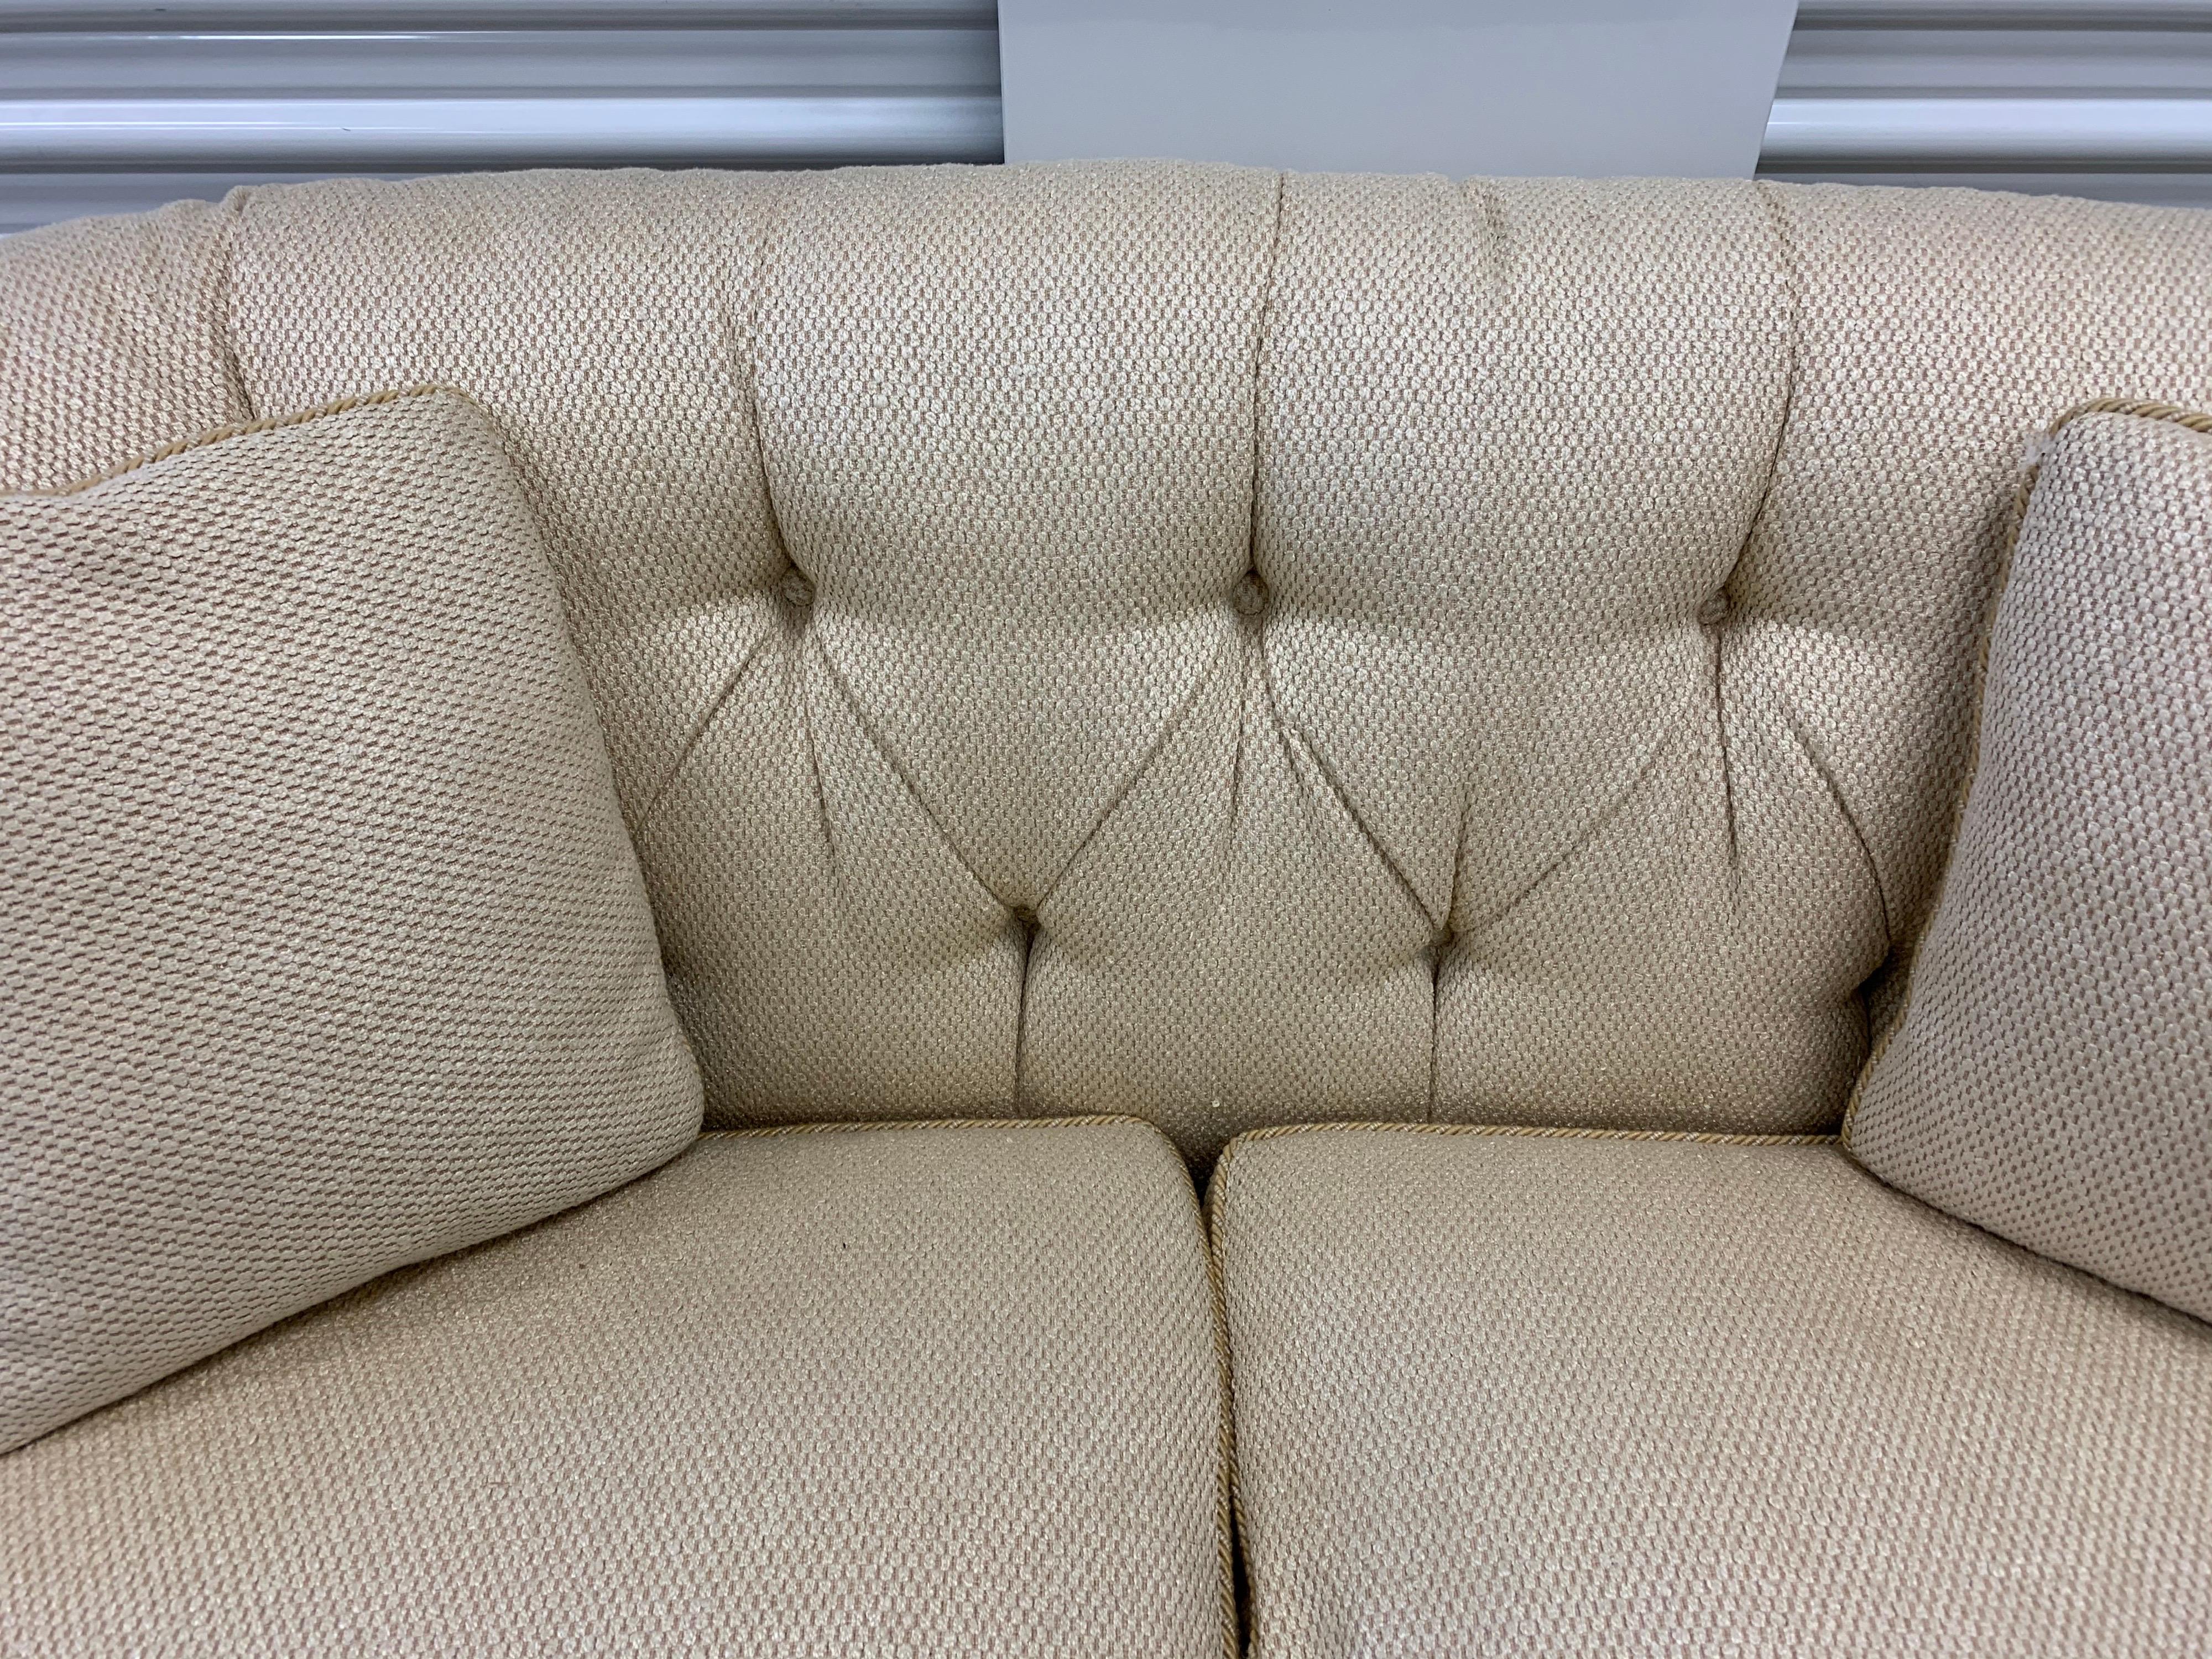 Fabric Baker Furniture Beige Tufted Chesterfield Loveseat Sofa